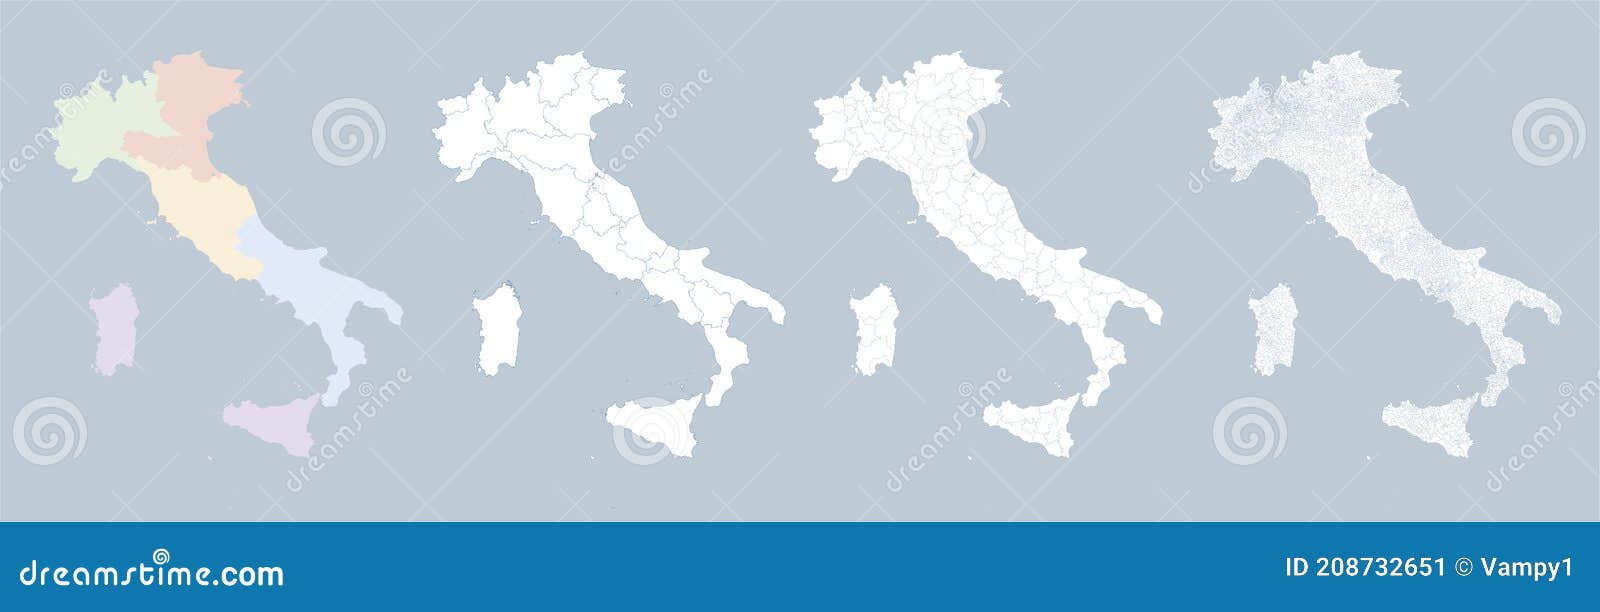 italy map division by zones regions provinces and municipalities. closed and perfectly editable polygons